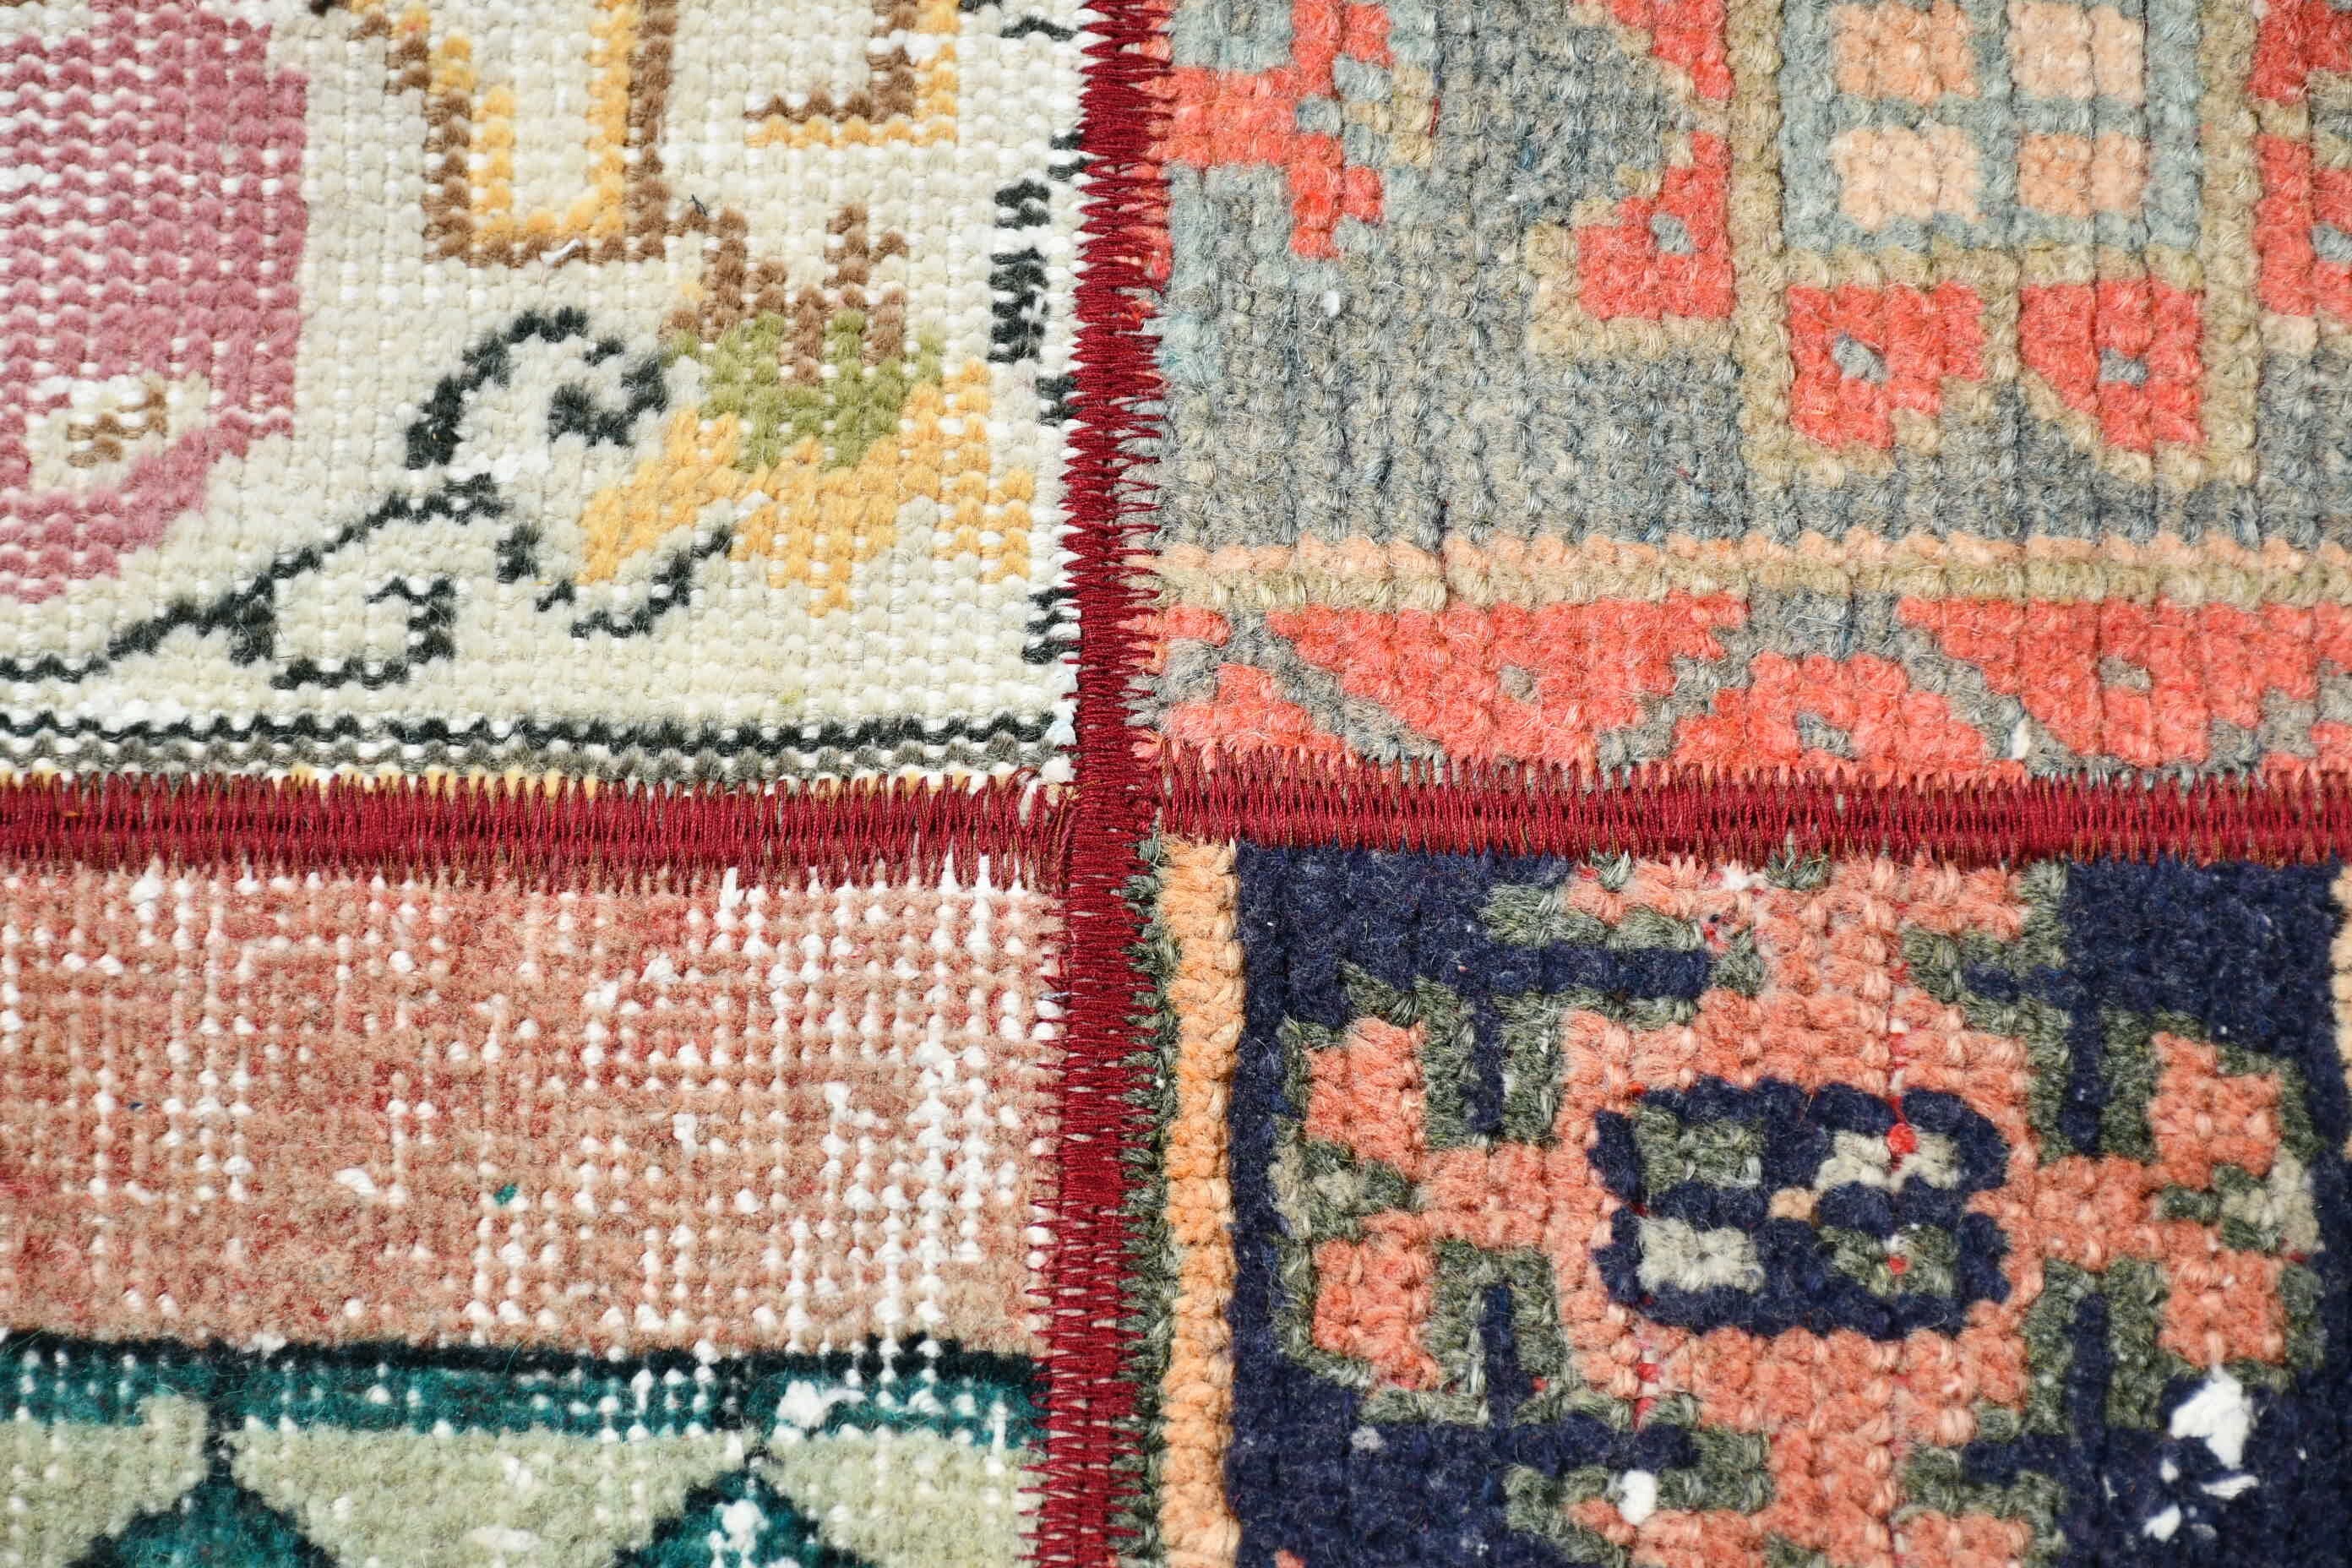 Kitchen Rug, Rugs for Entry, Turkish Rugs, Entry Rugs, Beige Moroccan Rug, 3.4x5.2 ft Accent Rug, Vintage Rugs, Handwoven Rug, Antique Rug